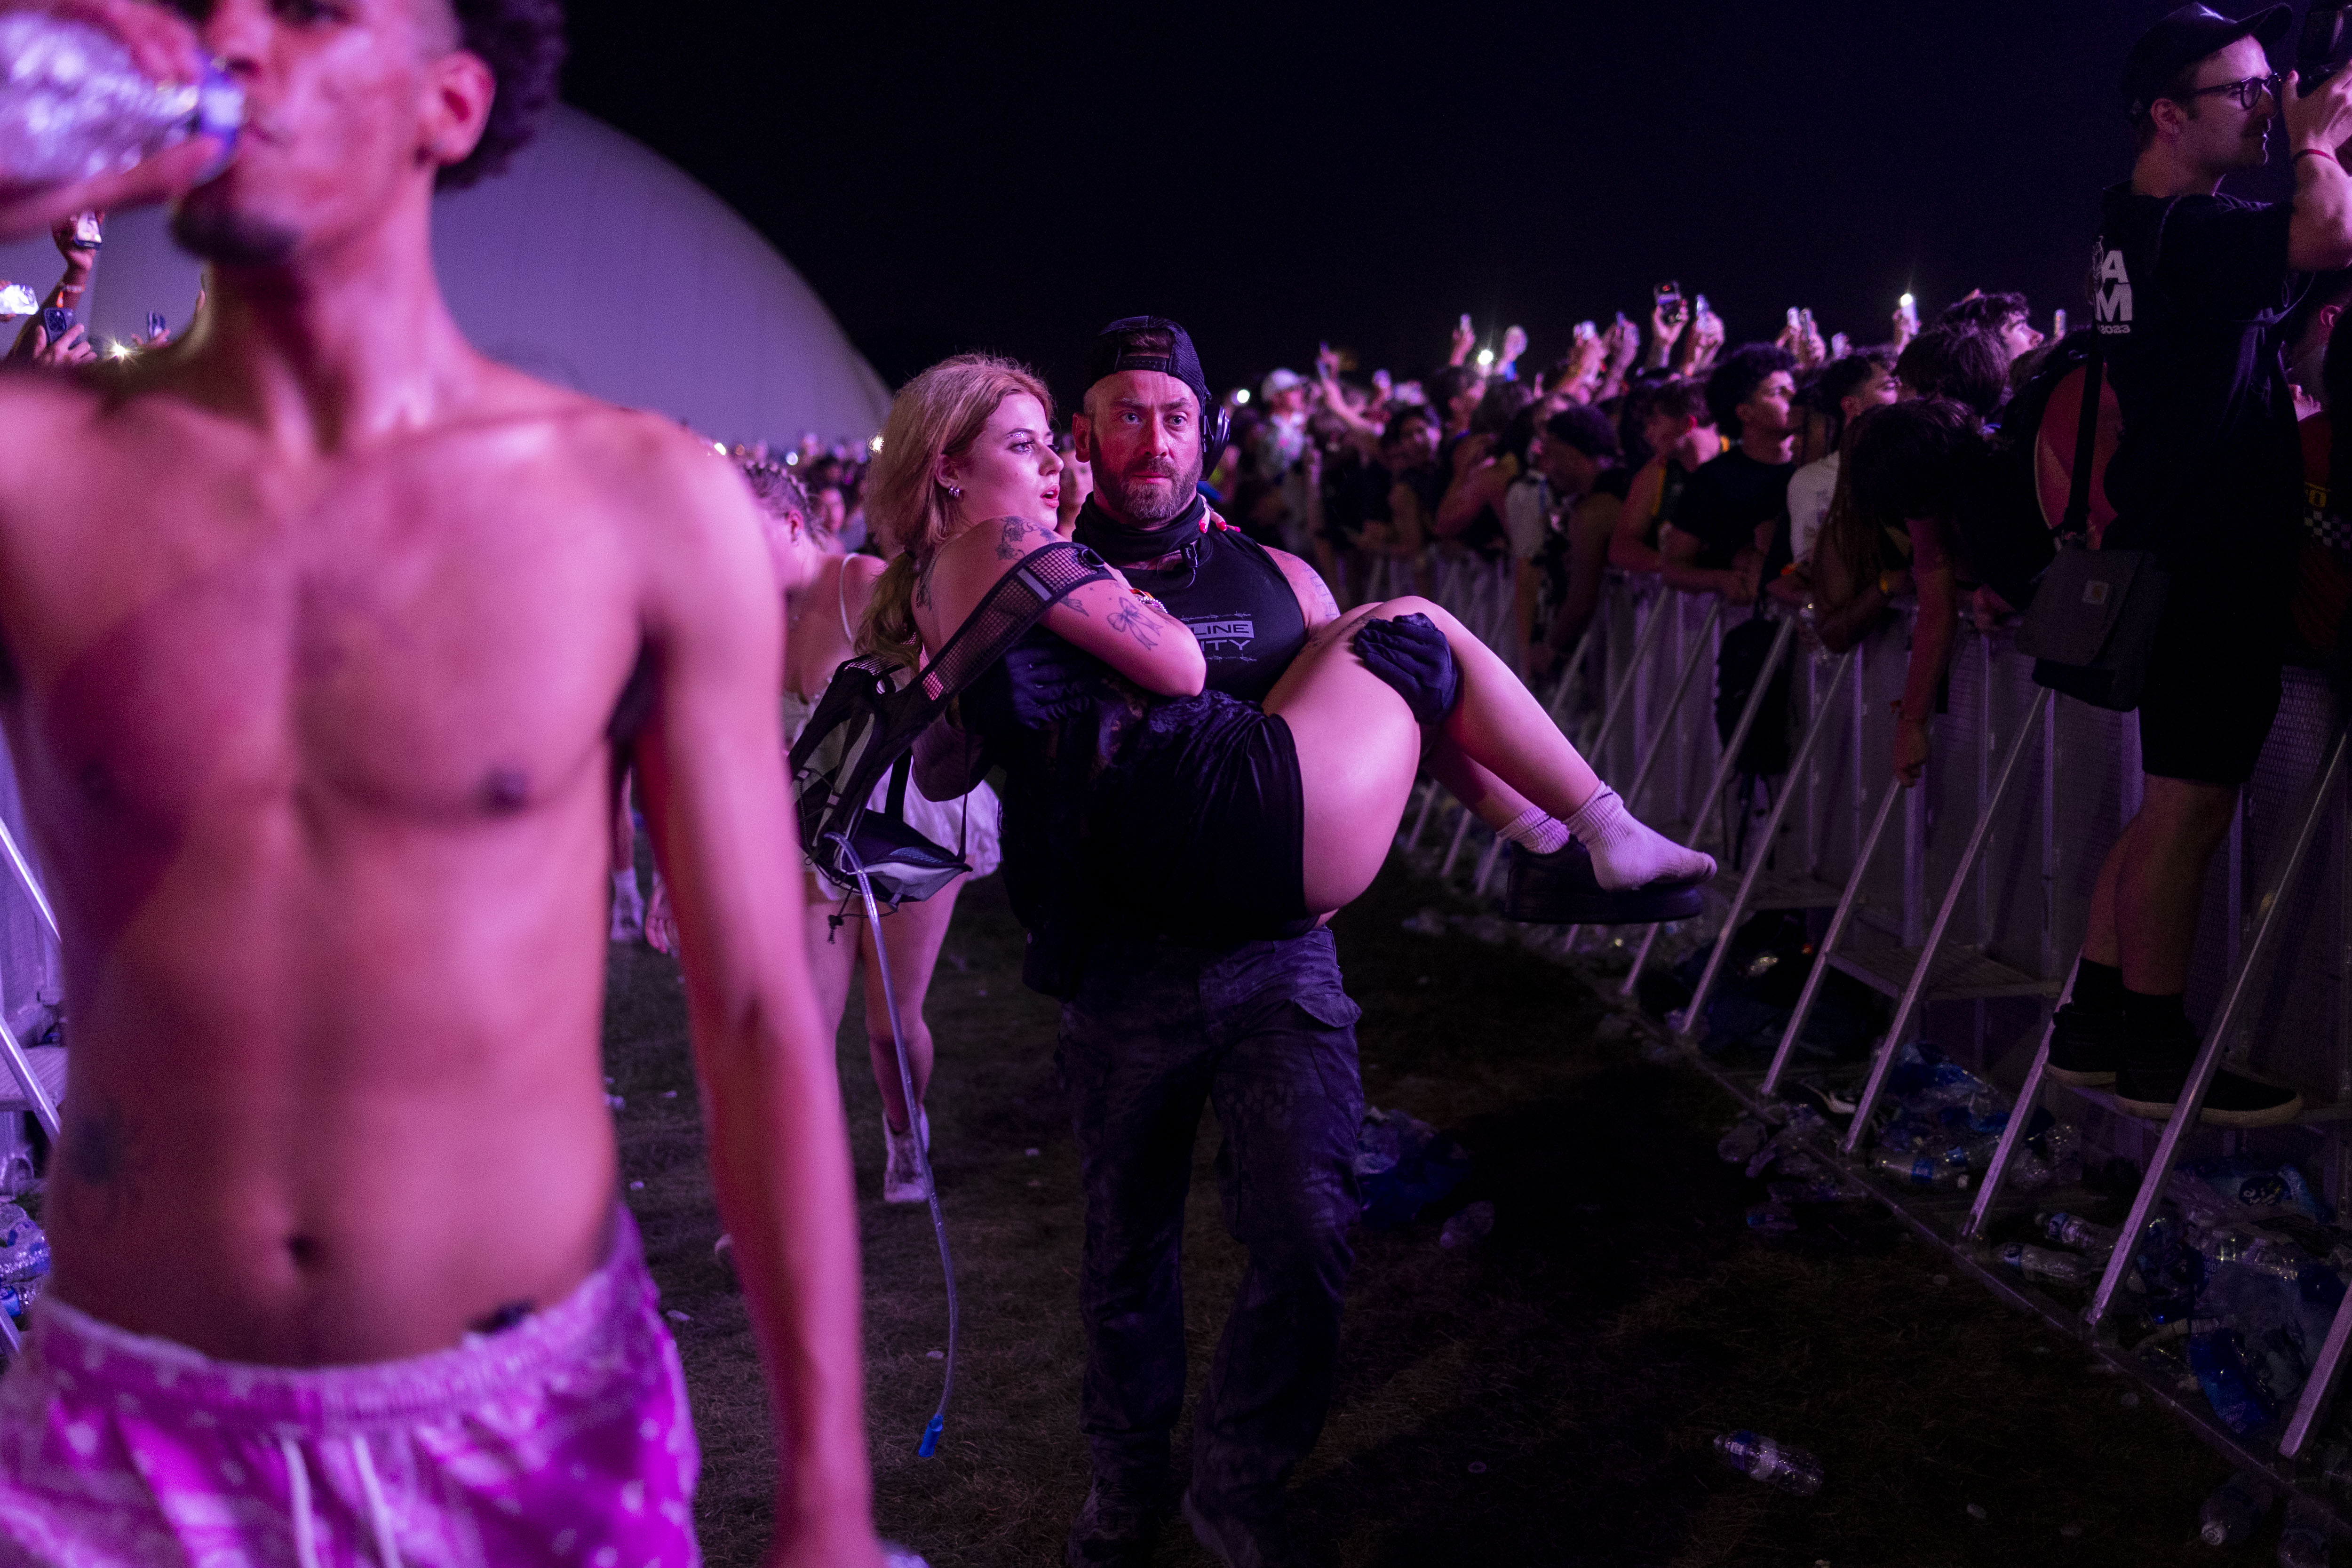 A festival goer is voluntarily removed by security from the...